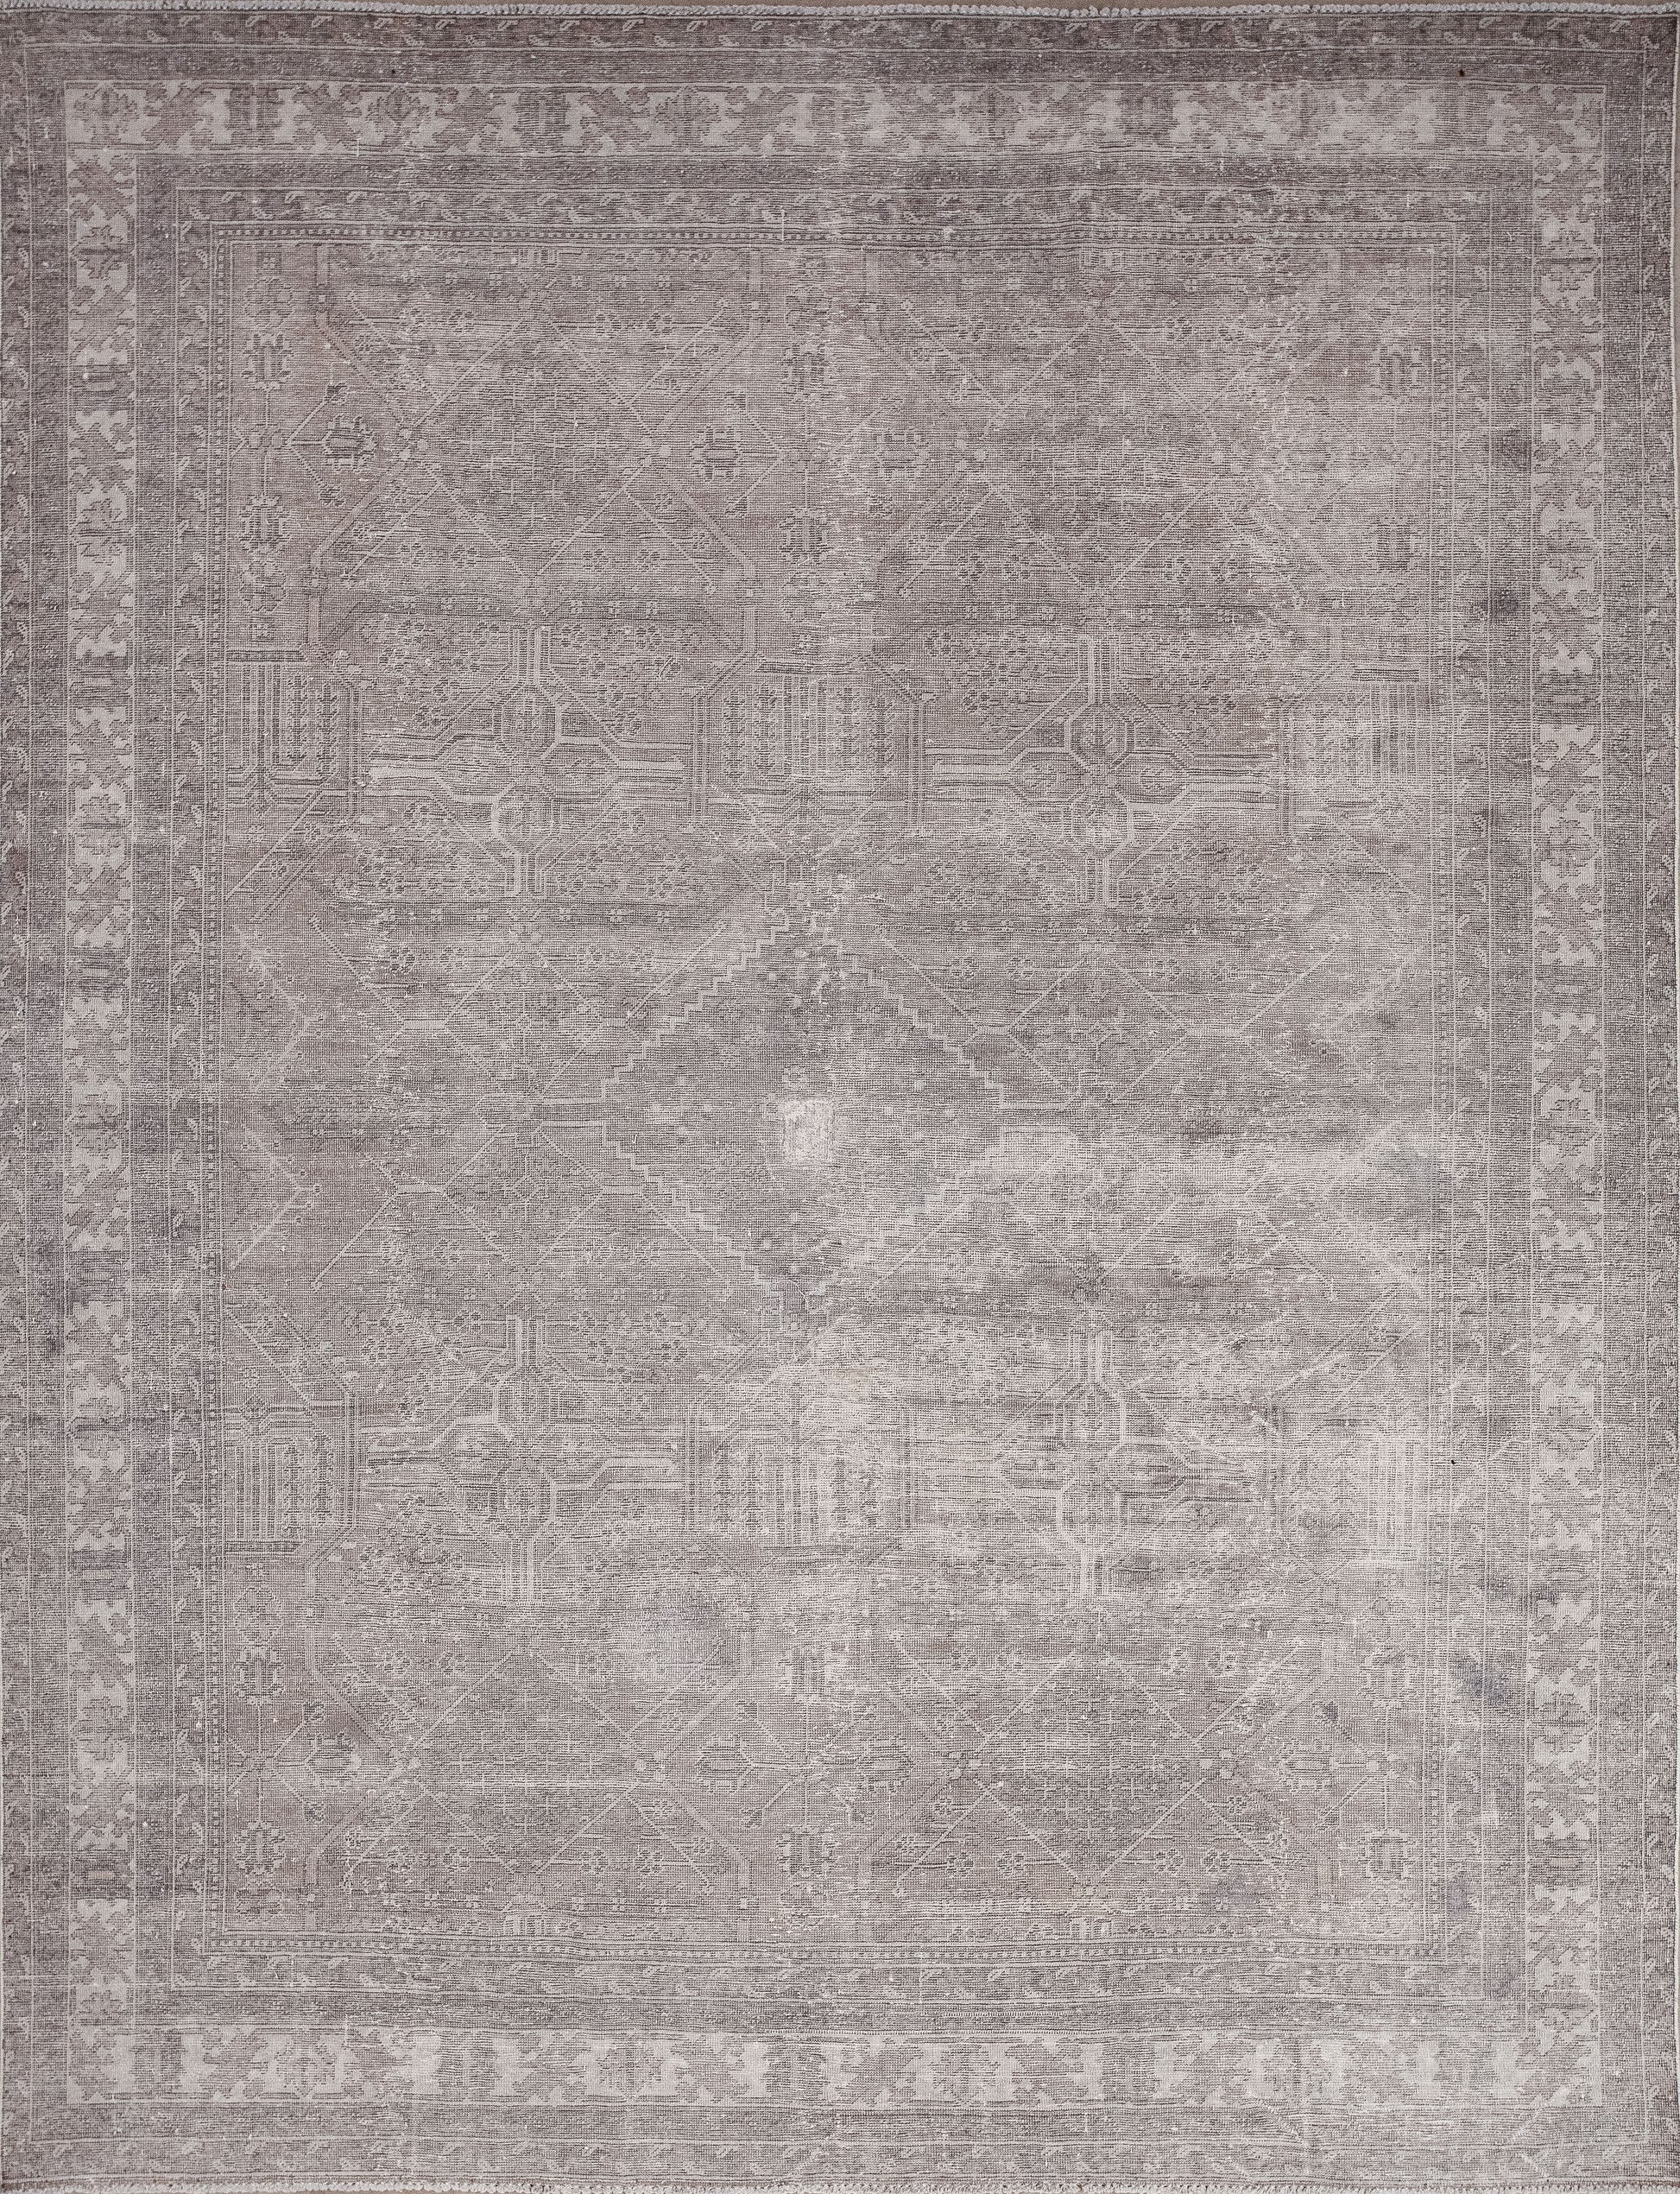 This mesmerizing rug was woven to capture your attention and make you look at it a little deeper. The balanced color palette has various shades of gray and brown accents.